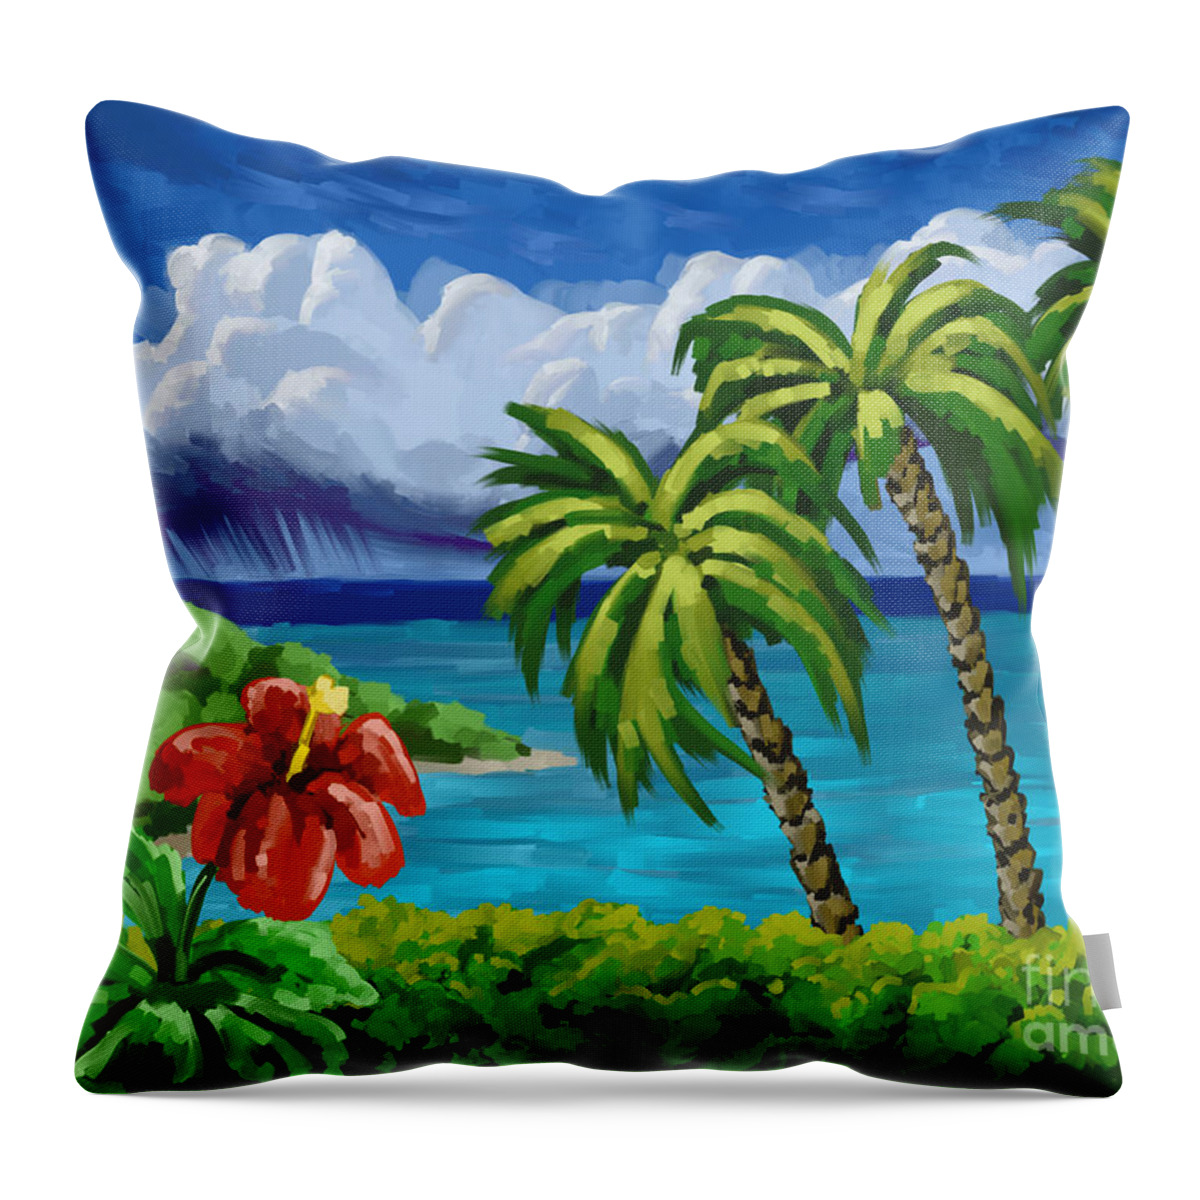 Rain Throw Pillow featuring the painting Rain In The Islands by Tim Gilliland